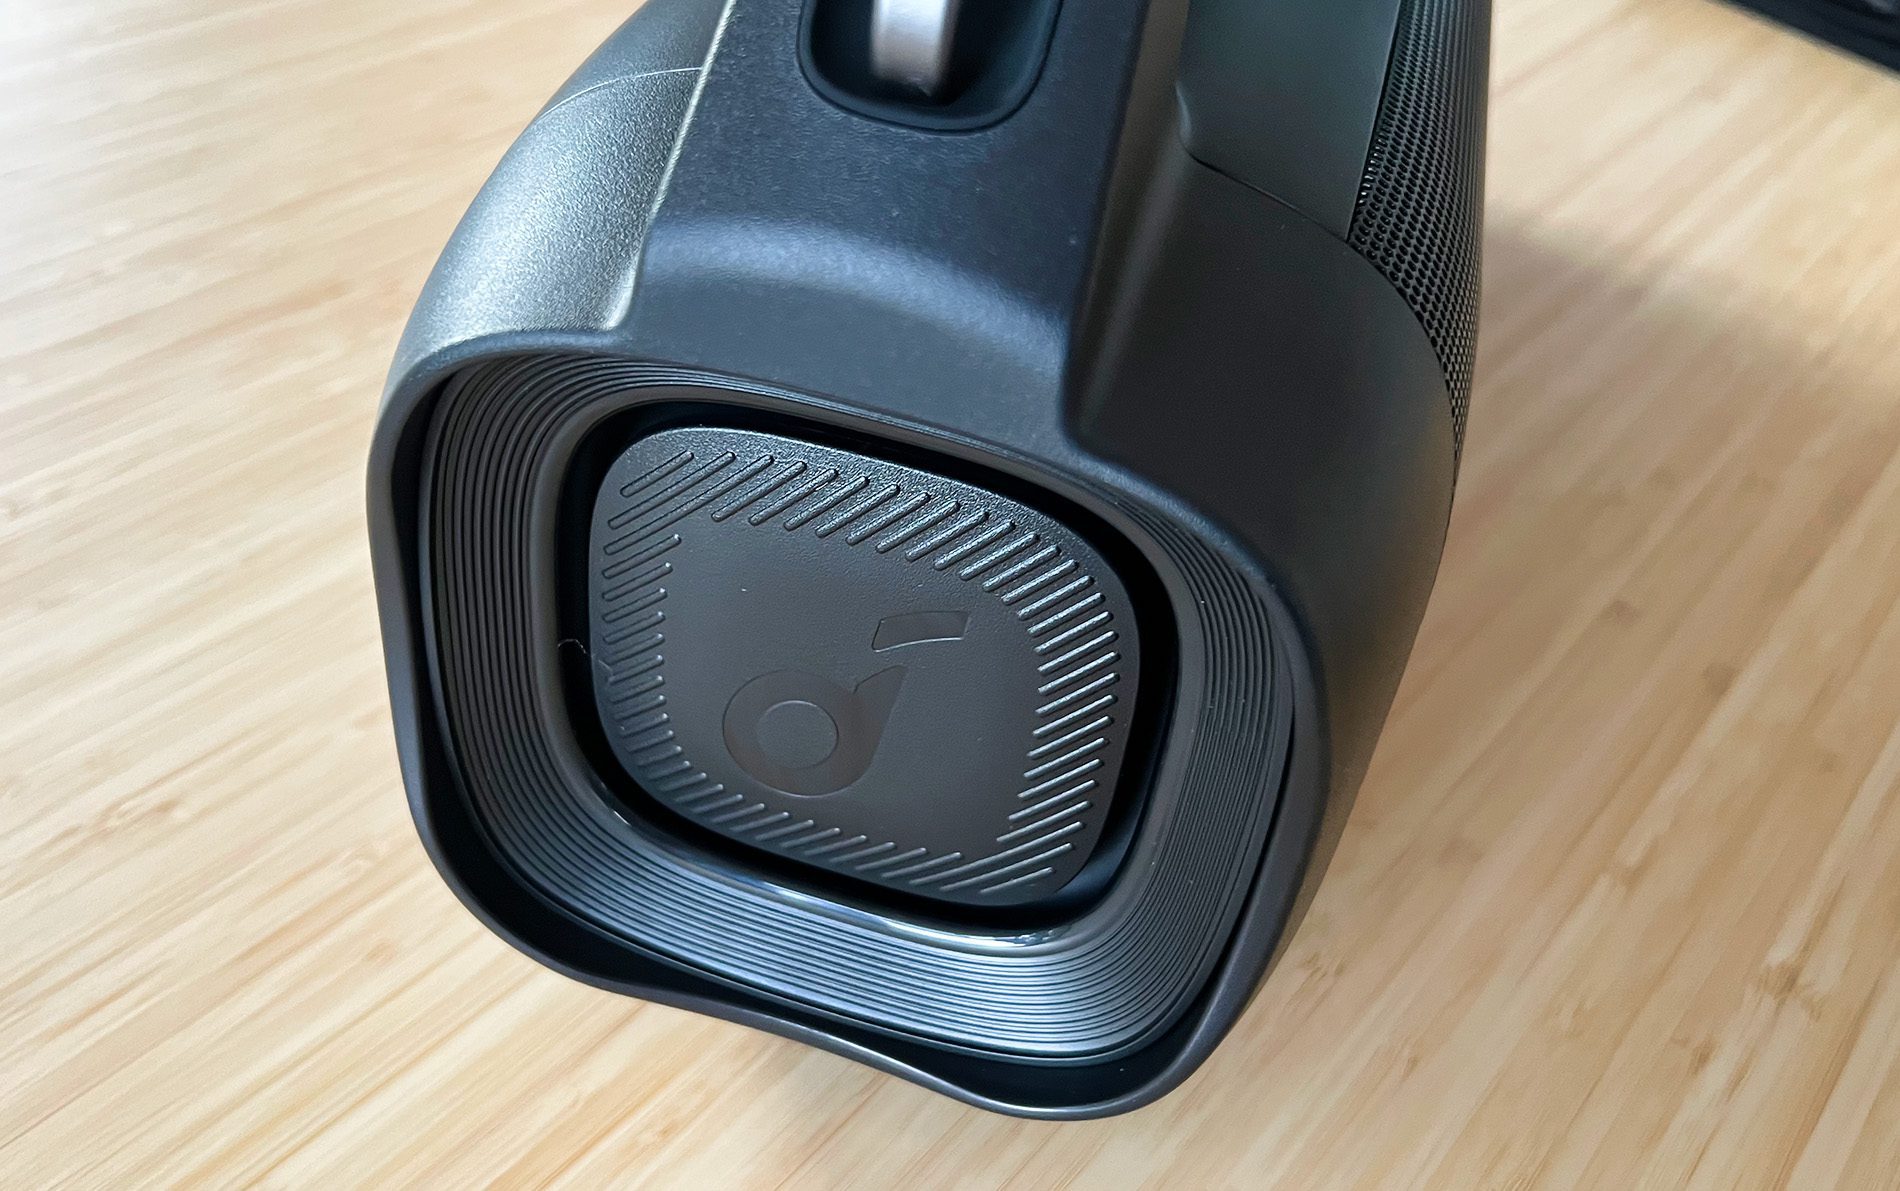 Woofers are installed on the left and right of the box, which reproduce the low frequencies in particular and thus ensure a strong bass (photos: Sir Apfelot).